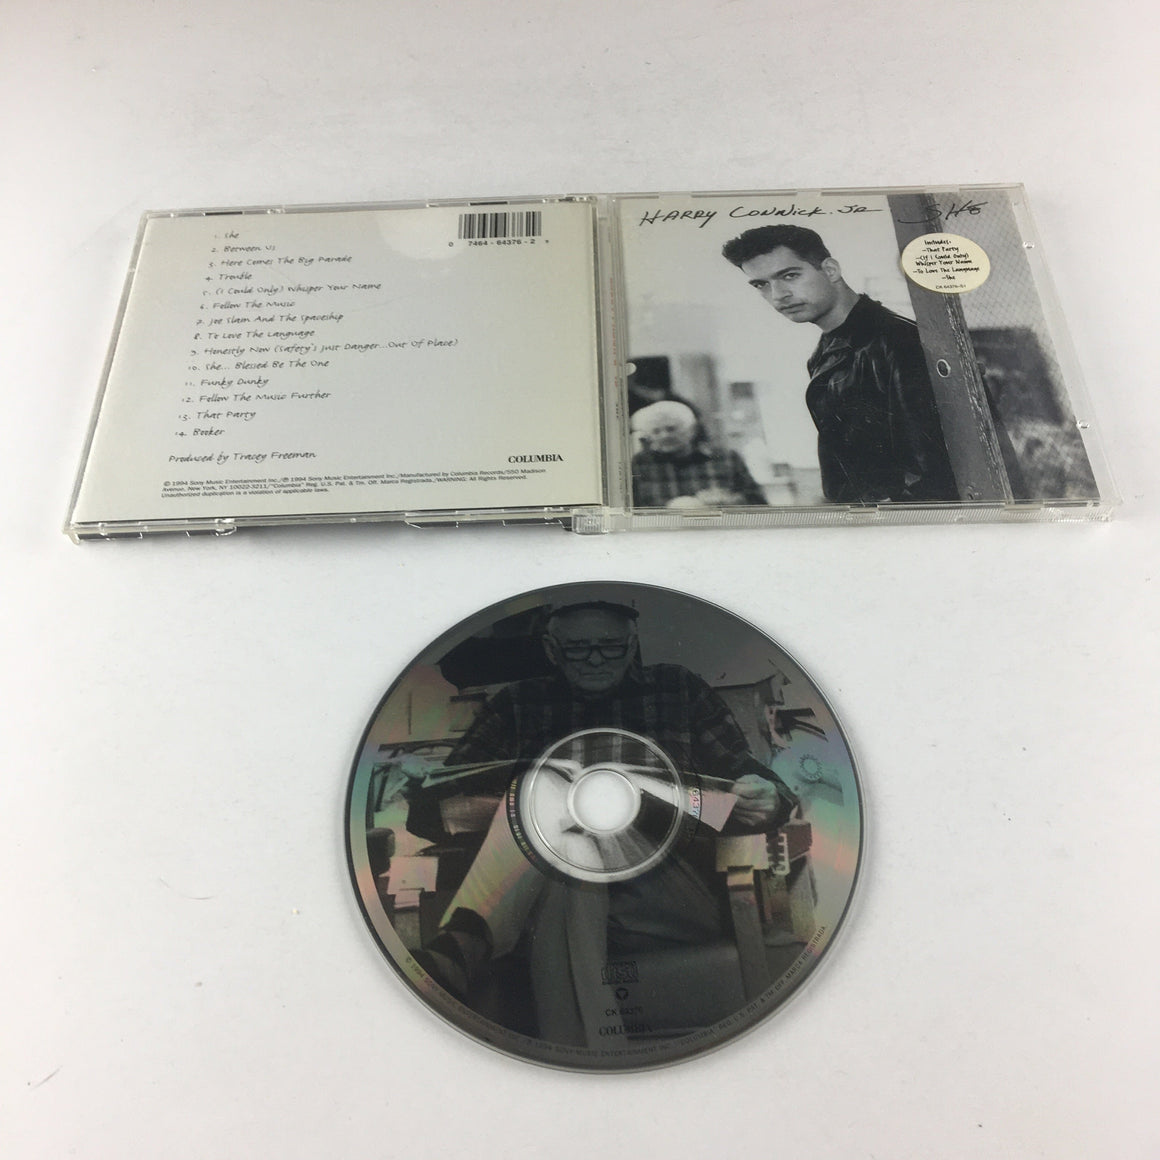 Harry Connick, Jr. She Used CD VG\VG